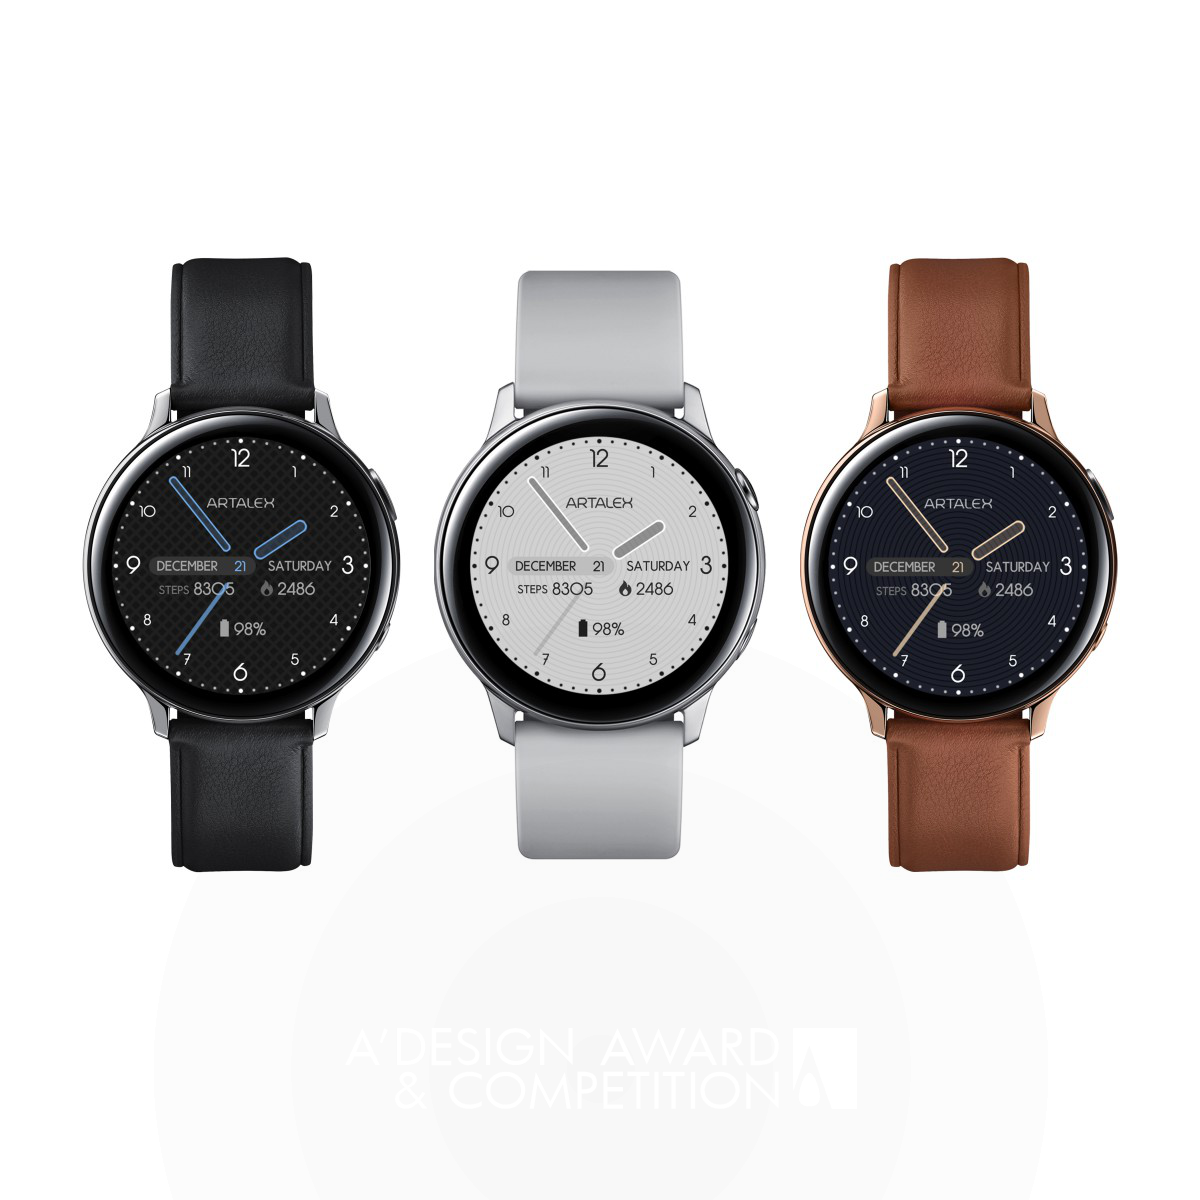 Pan Yong wins Bronze at the prestigious A' Interface, Interaction and User Experience Design Award with Simple Code II Saphire Smartwatch Face.